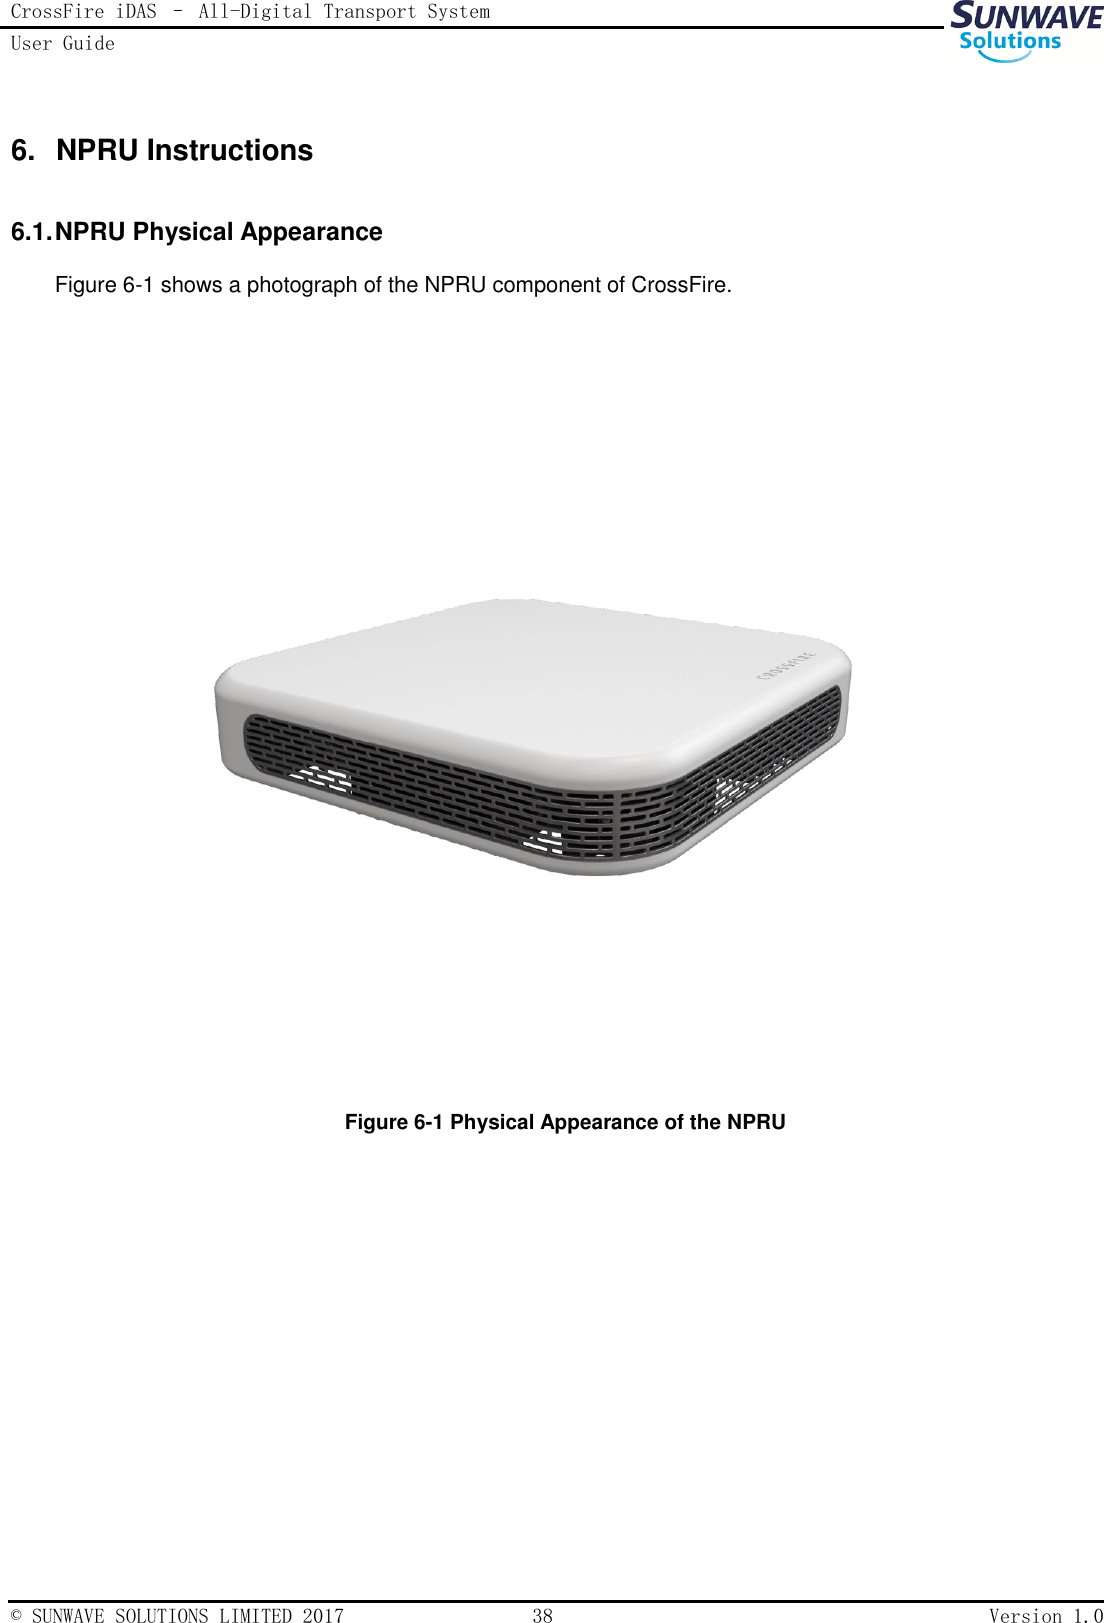 CrossFire iDAS – All-Digital Transport System User Guide   © SUNWAVE SOLUTIONS LIMITED 2017  38  Version 1.0  6. NPRU Instructions 6.1. NPRU Physical Appearance Figure 6-1 shows a photograph of the NPRU component of CrossFire.   Figure 6-1 Physical Appearance of the NPRU        